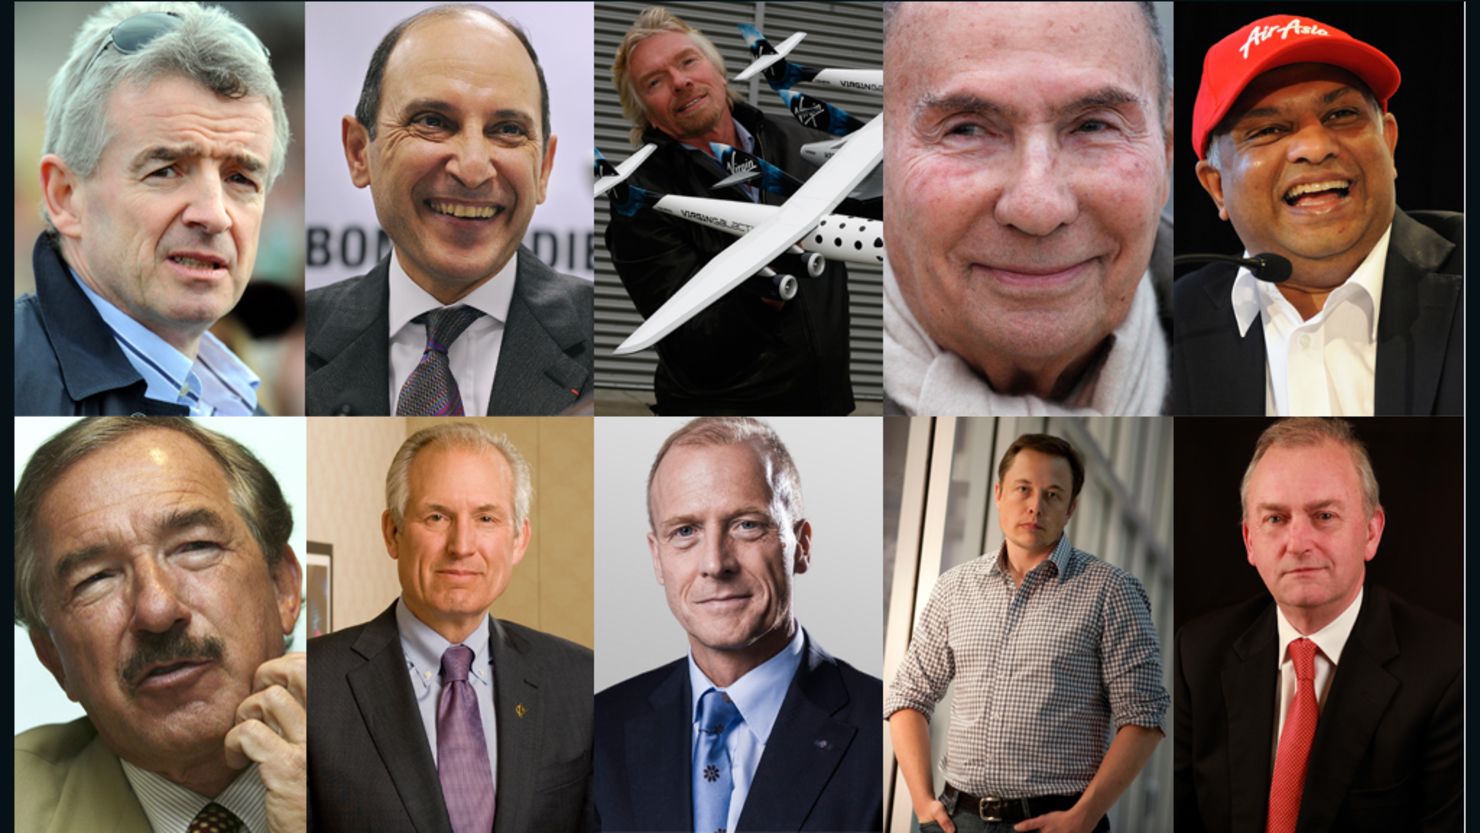 Aerospace magazine editor, Tim Robinson runs down a list of high-flying power players of the aviation industry for CNN.